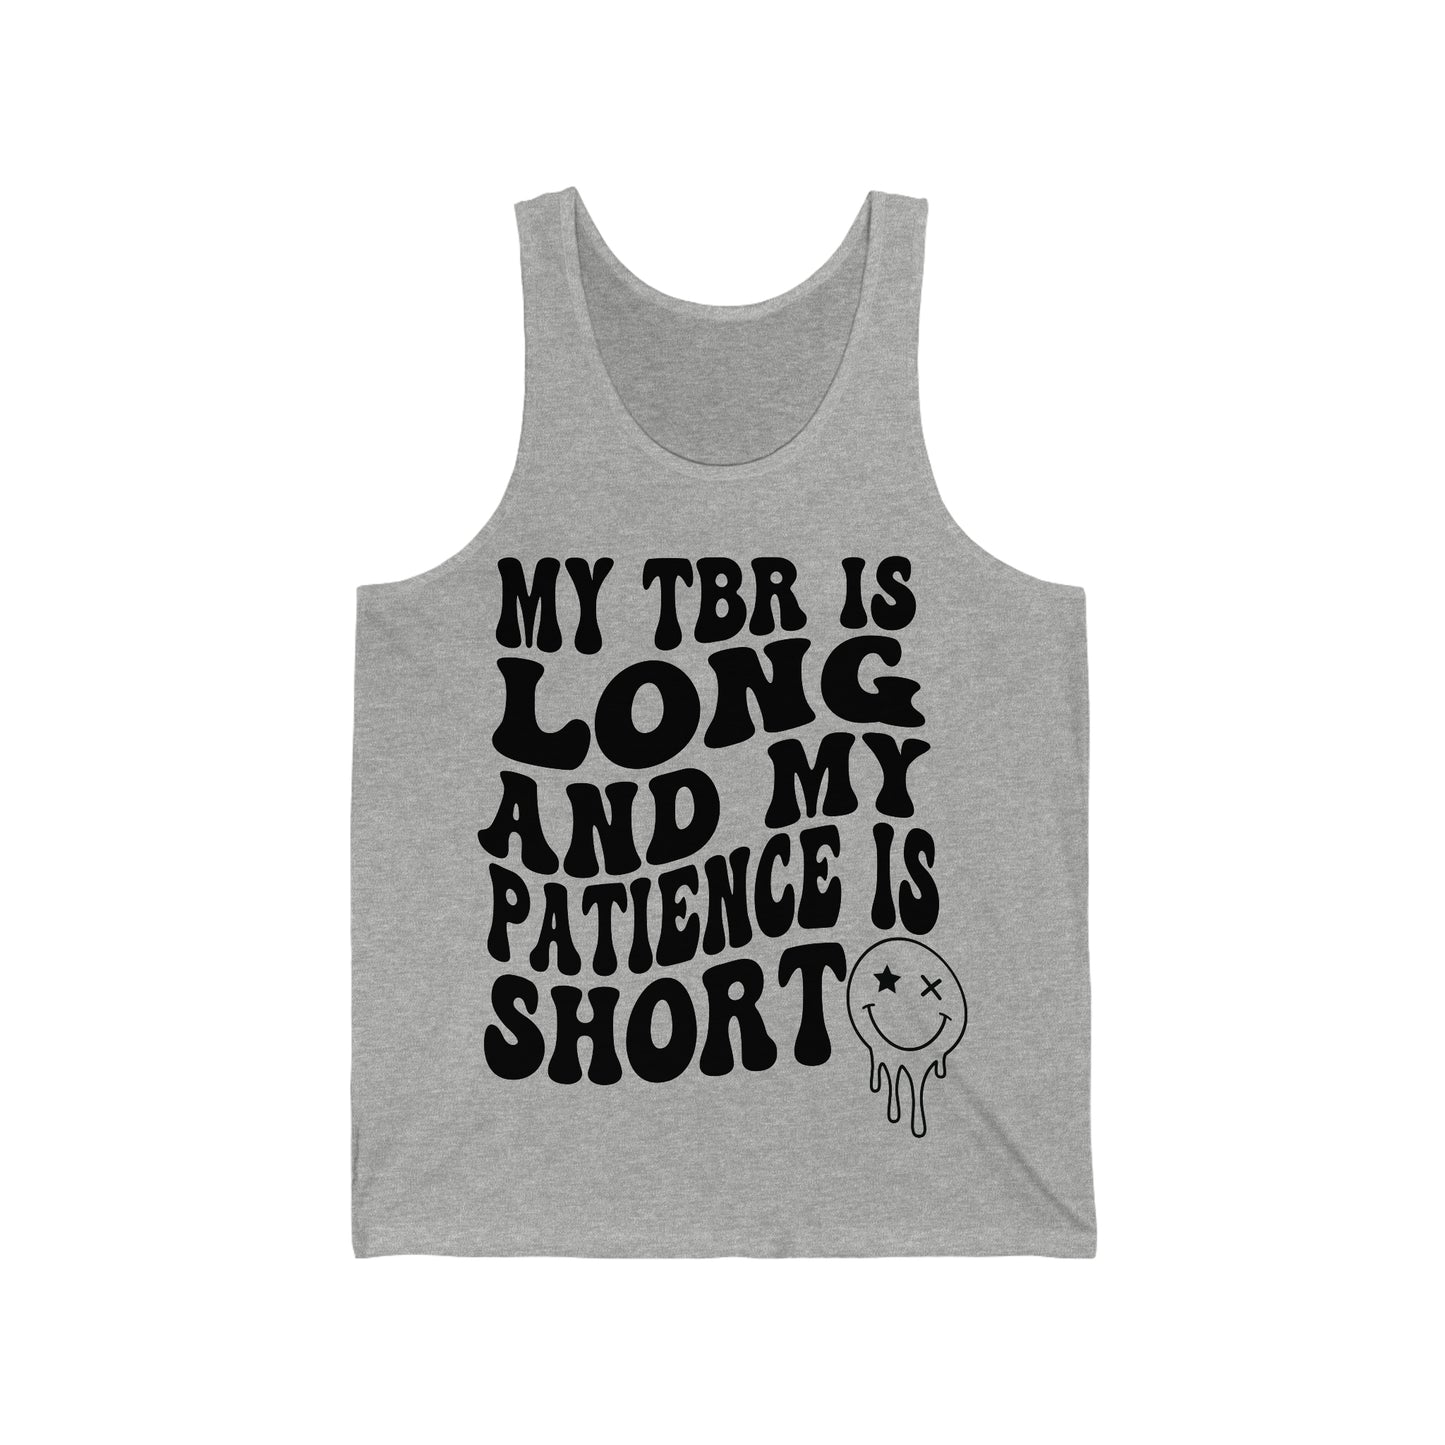 "My TBR is Long and my Patience is Short" Smiley Face Jersey Tank